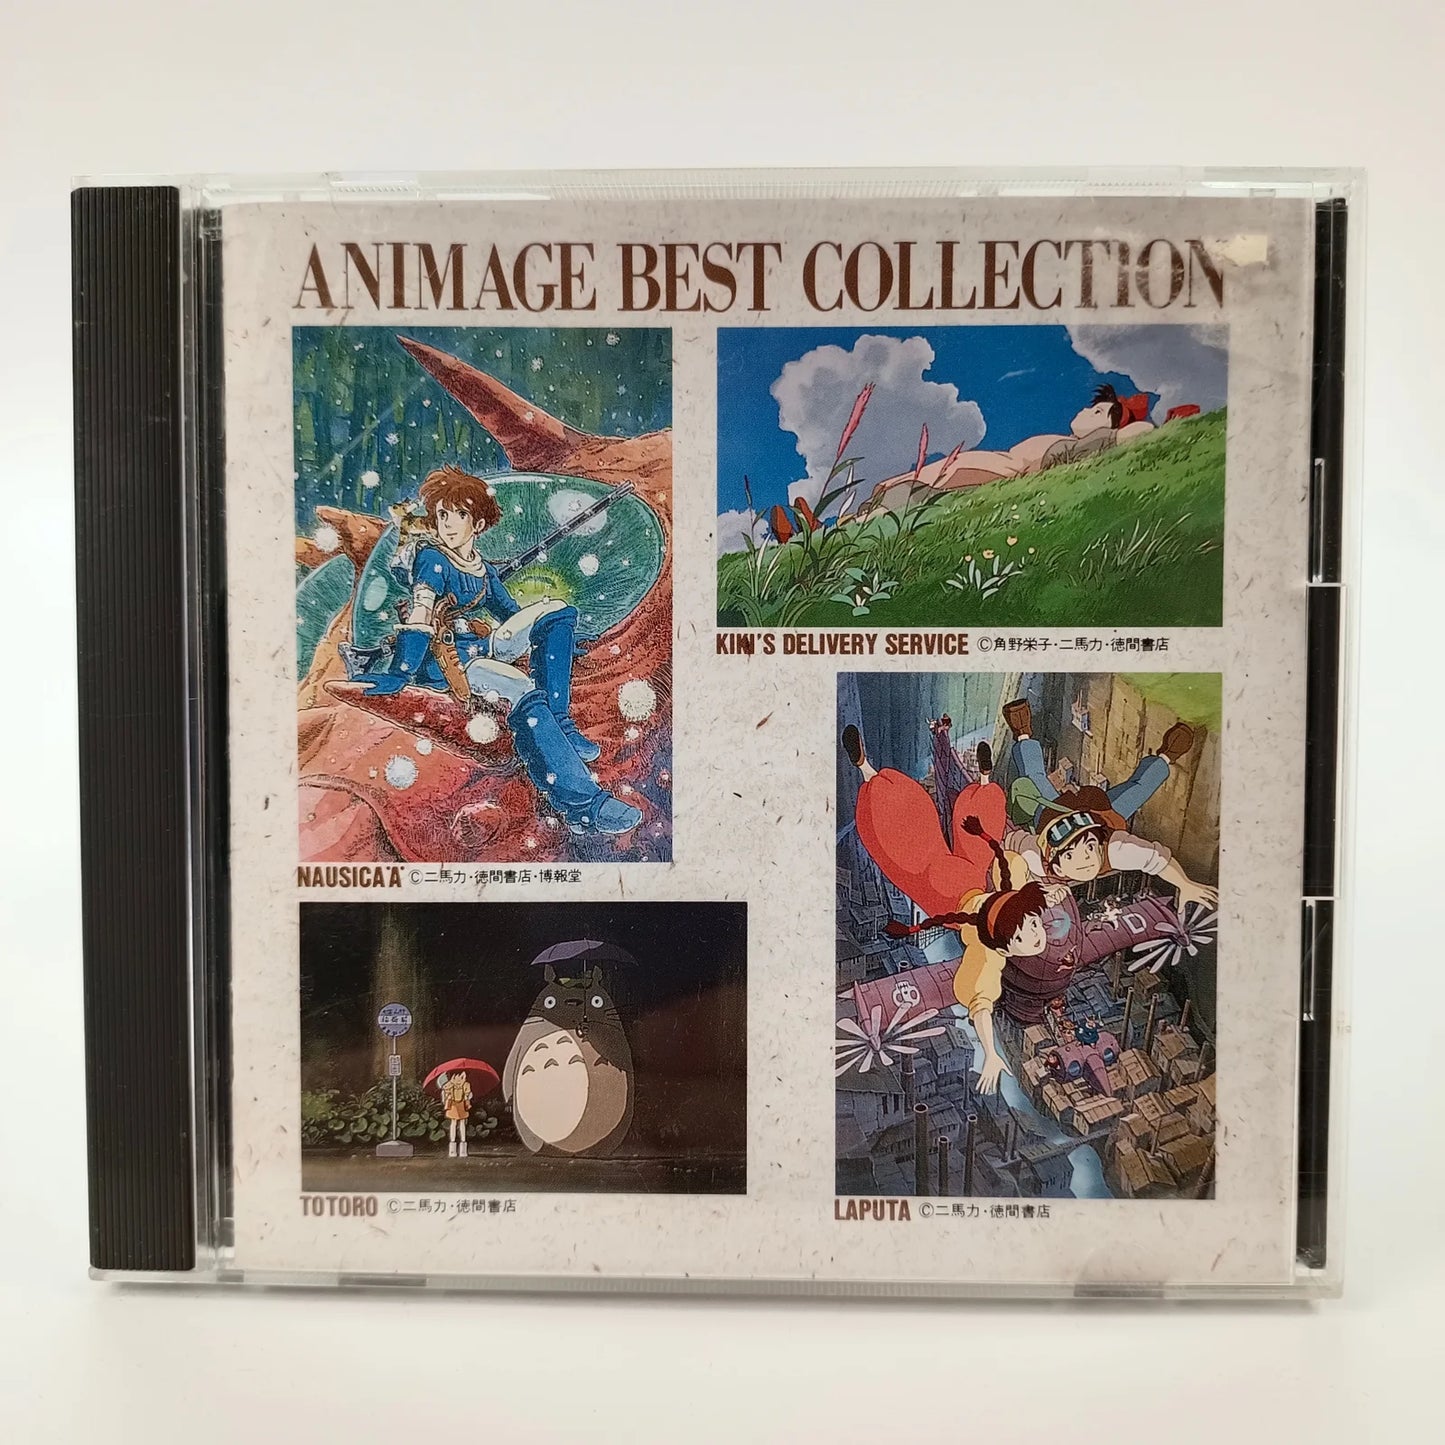 Animage Best Collection